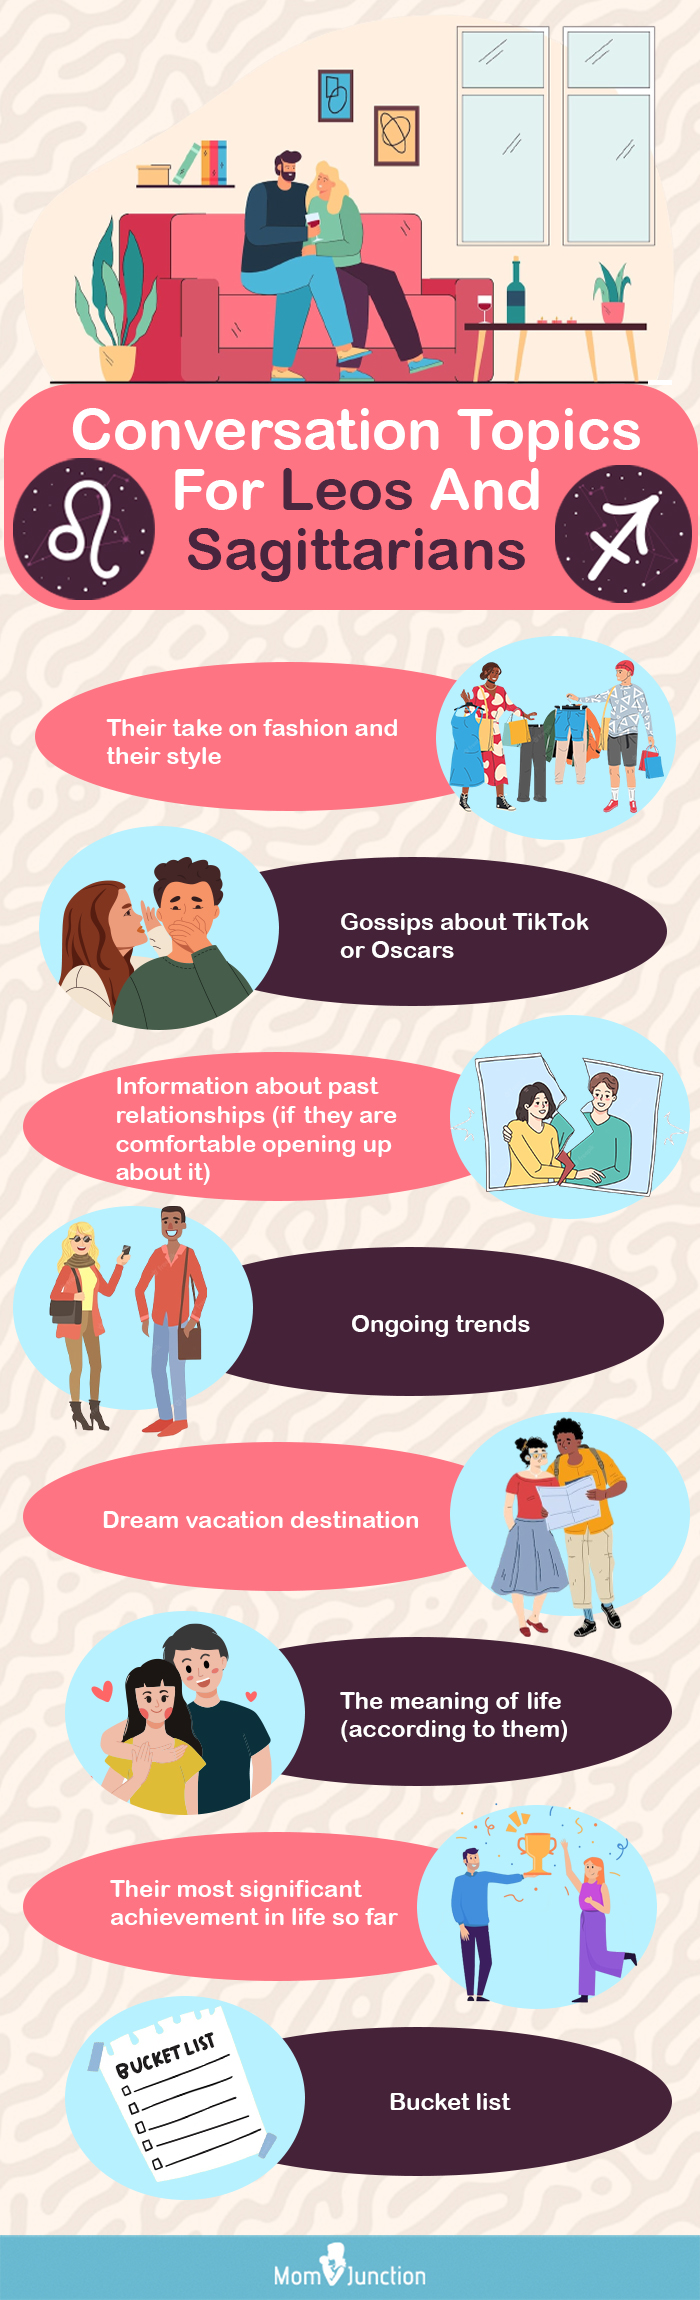 conversation topics for leos and sagittarians (infographic)